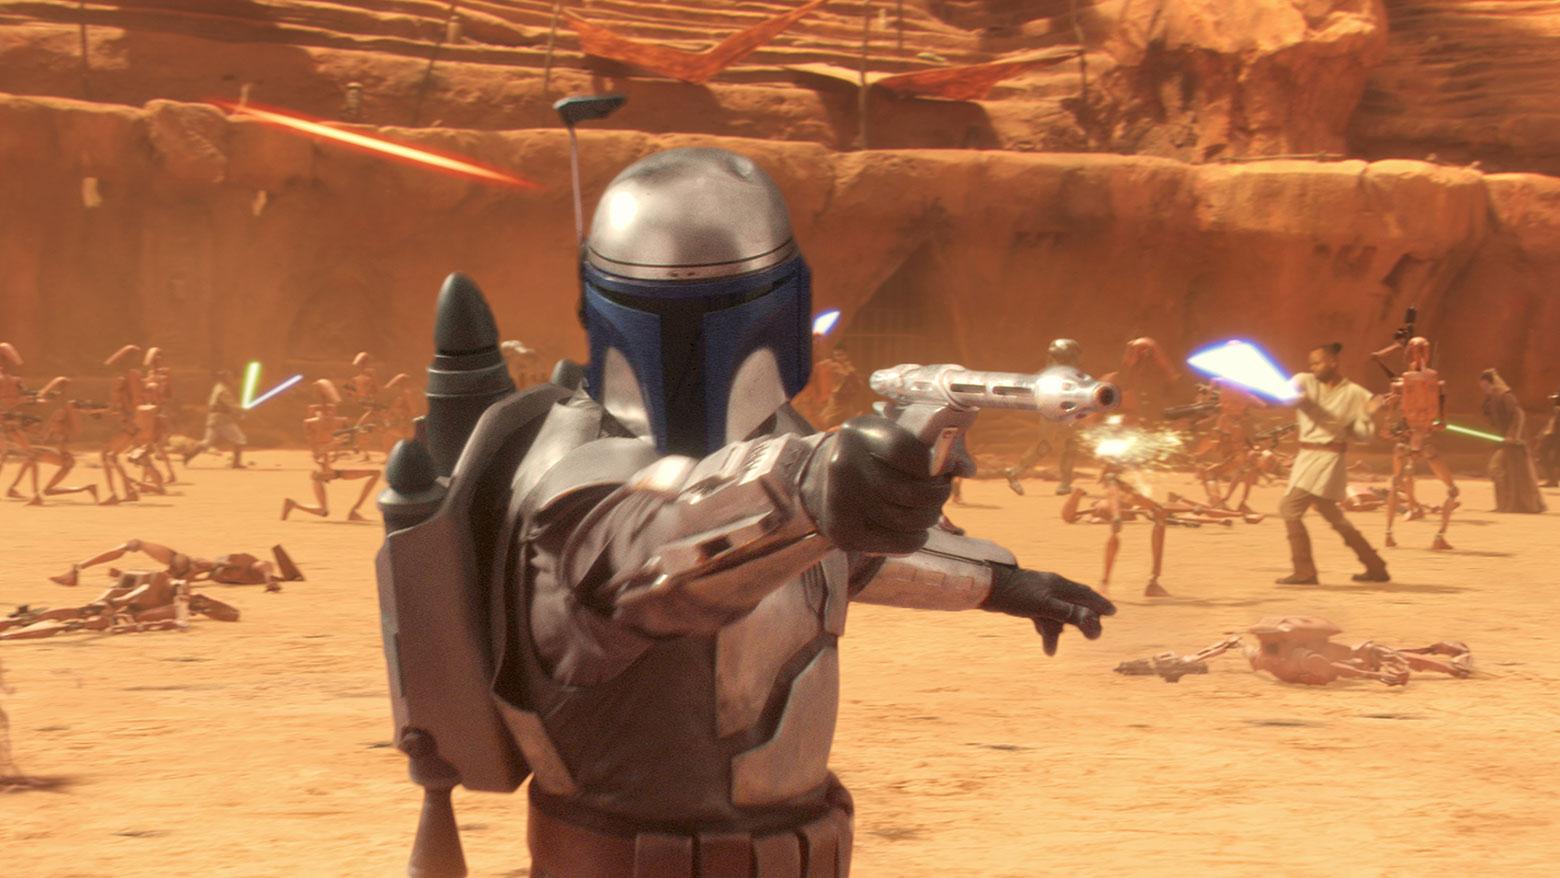 Morrison played Boba Fett's father Jango all the way back in The Attack of the Clones in 2002.